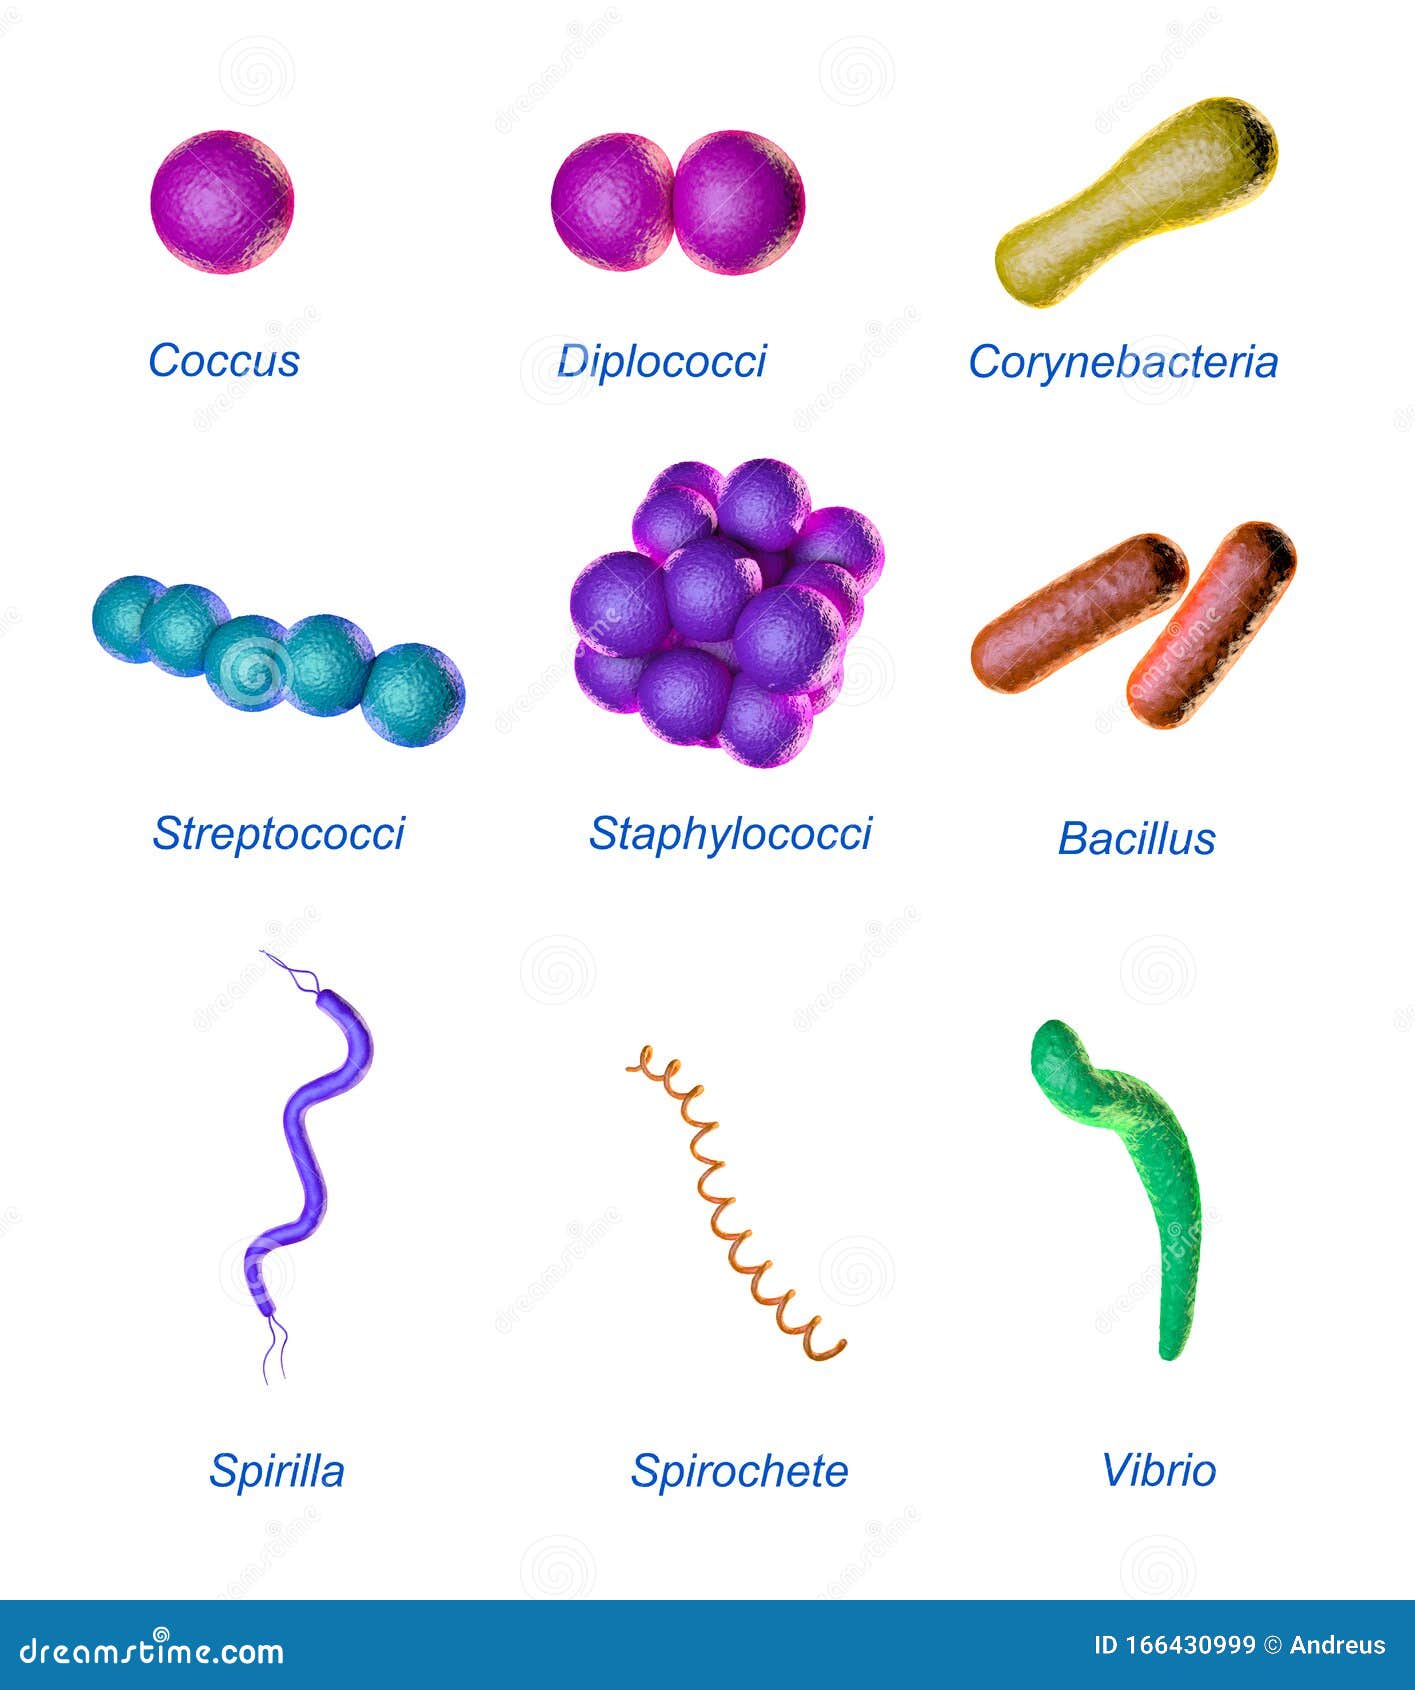 Bacteria In Microbiology Shapes Structure And Diagram | Images and ...